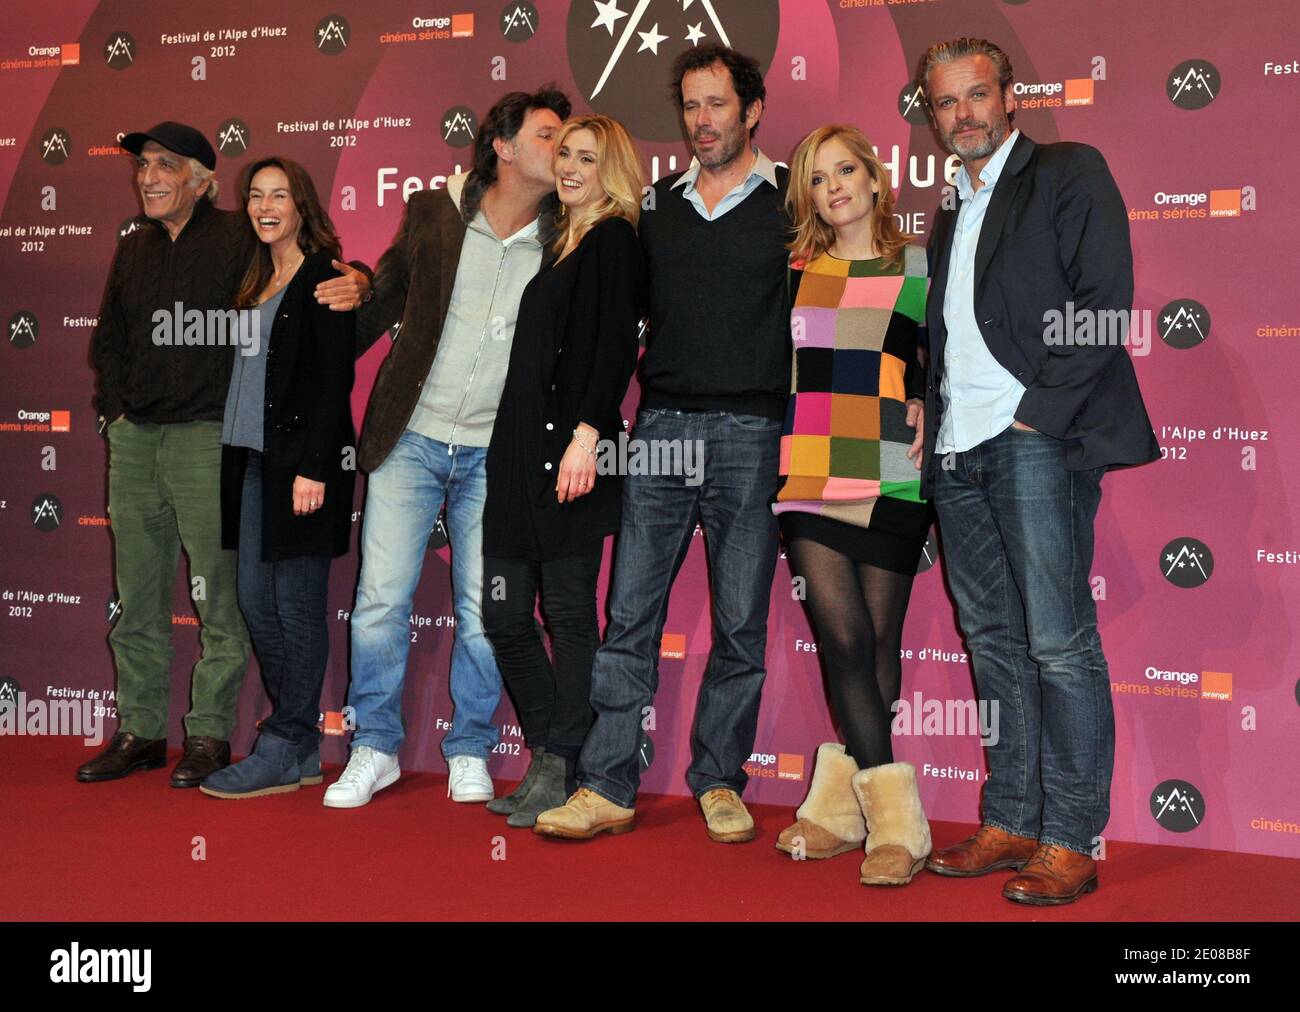 Gerard Darmon, Vanessa Demouy, Philippe Lellouche, Julie Gayet, Christian Vadim, Julie Bernard and David Brecourt posing at 'La Clinique De L'Amour' photocall as part of the 15th Alpe d'Huez Comedy Film Festival held at l'Alpe d'Huez, France, on January 18, 2012. Photo by Charriau-Marechal/ABACAPRESS.COM Stock Photo